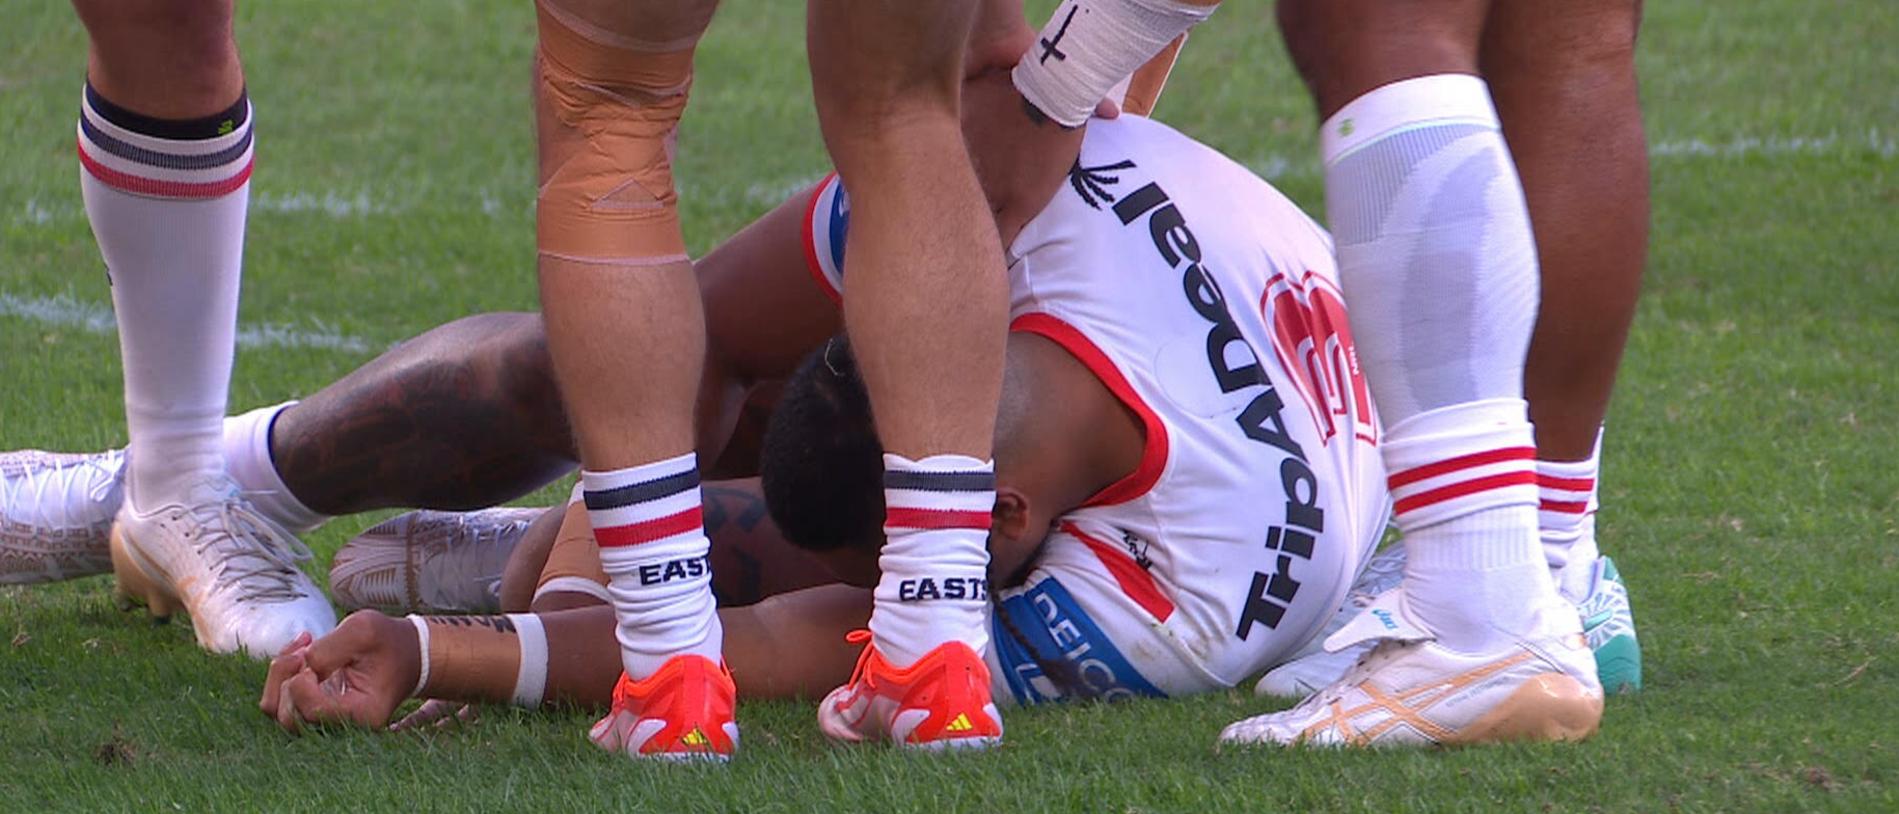 In a dramatic start to the Anzac Day clash, Dragons centre Mosese Suli has been taken off for an HIA following a heavy collision in the first tackle of the game.